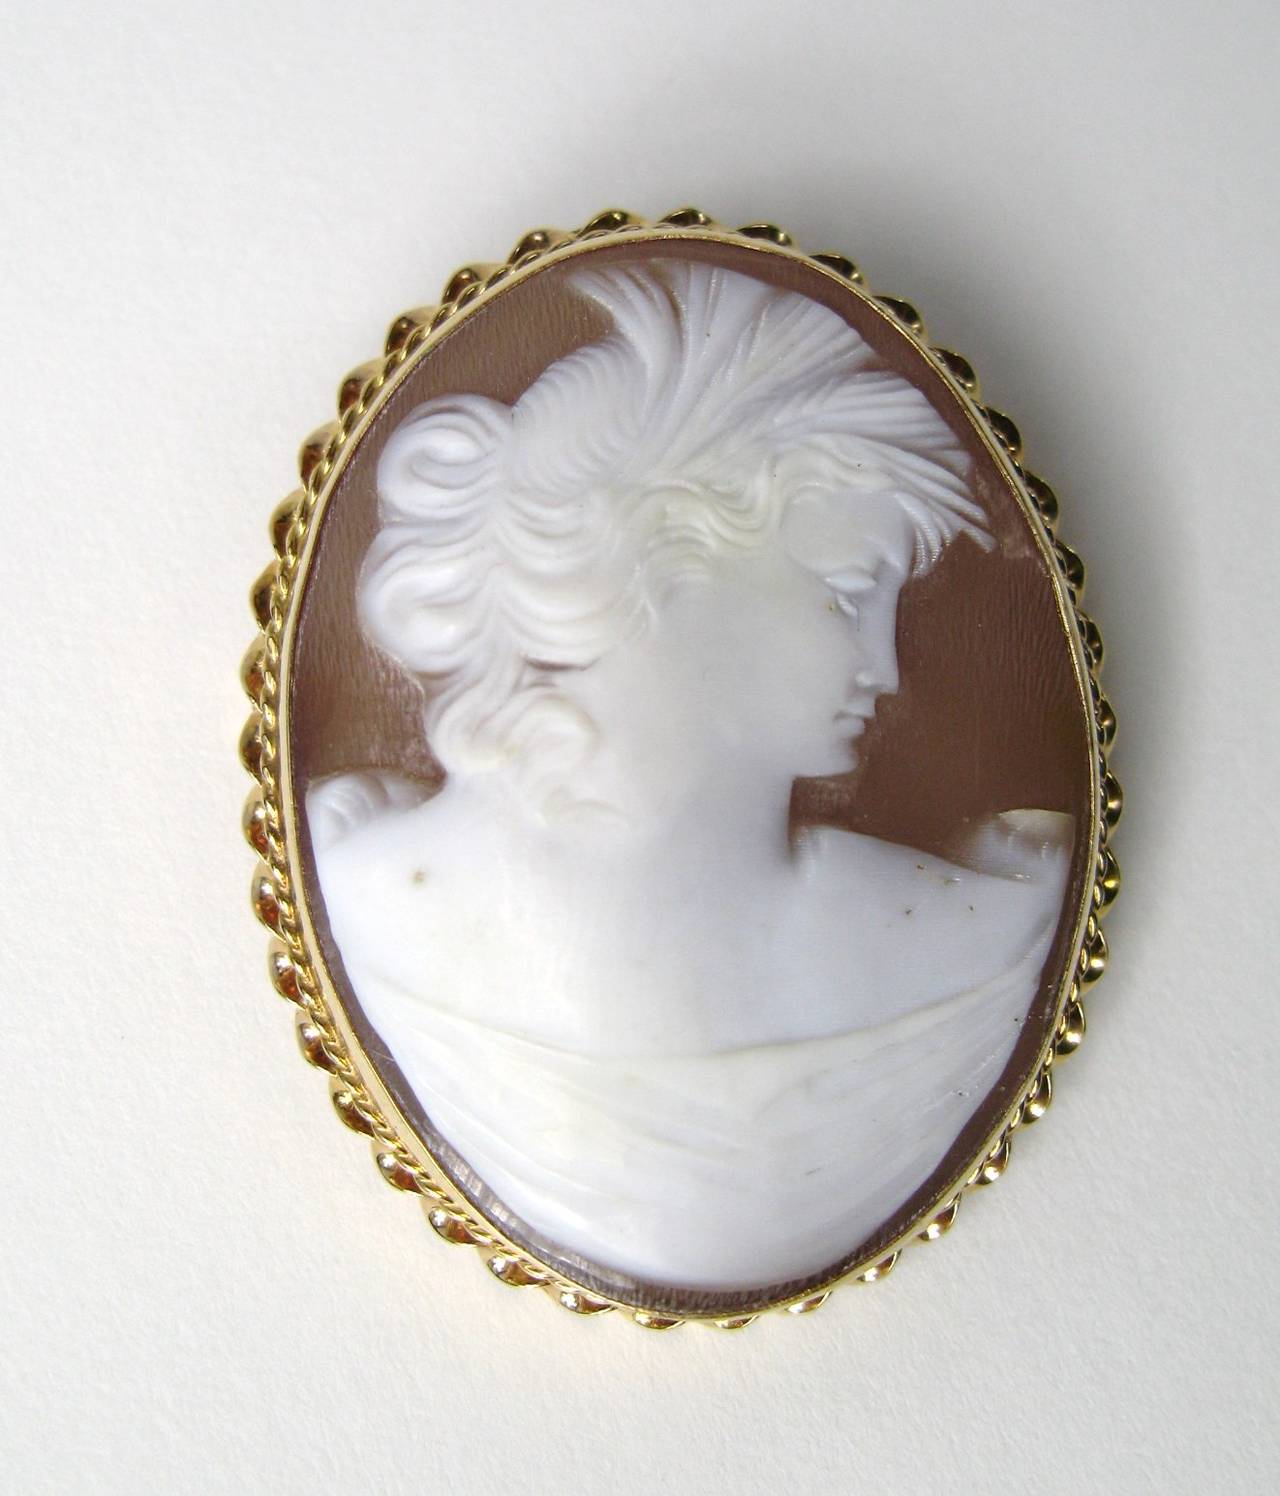 Stunning Carving on this lovely Victorian lady's Hair, swept up with curls. Set in a 14K gold surround. It is both a pin and a pendant Bale folds down when worn as a brooch. Measures 1.65 in x 1.28 in. This is out of a massive collection of